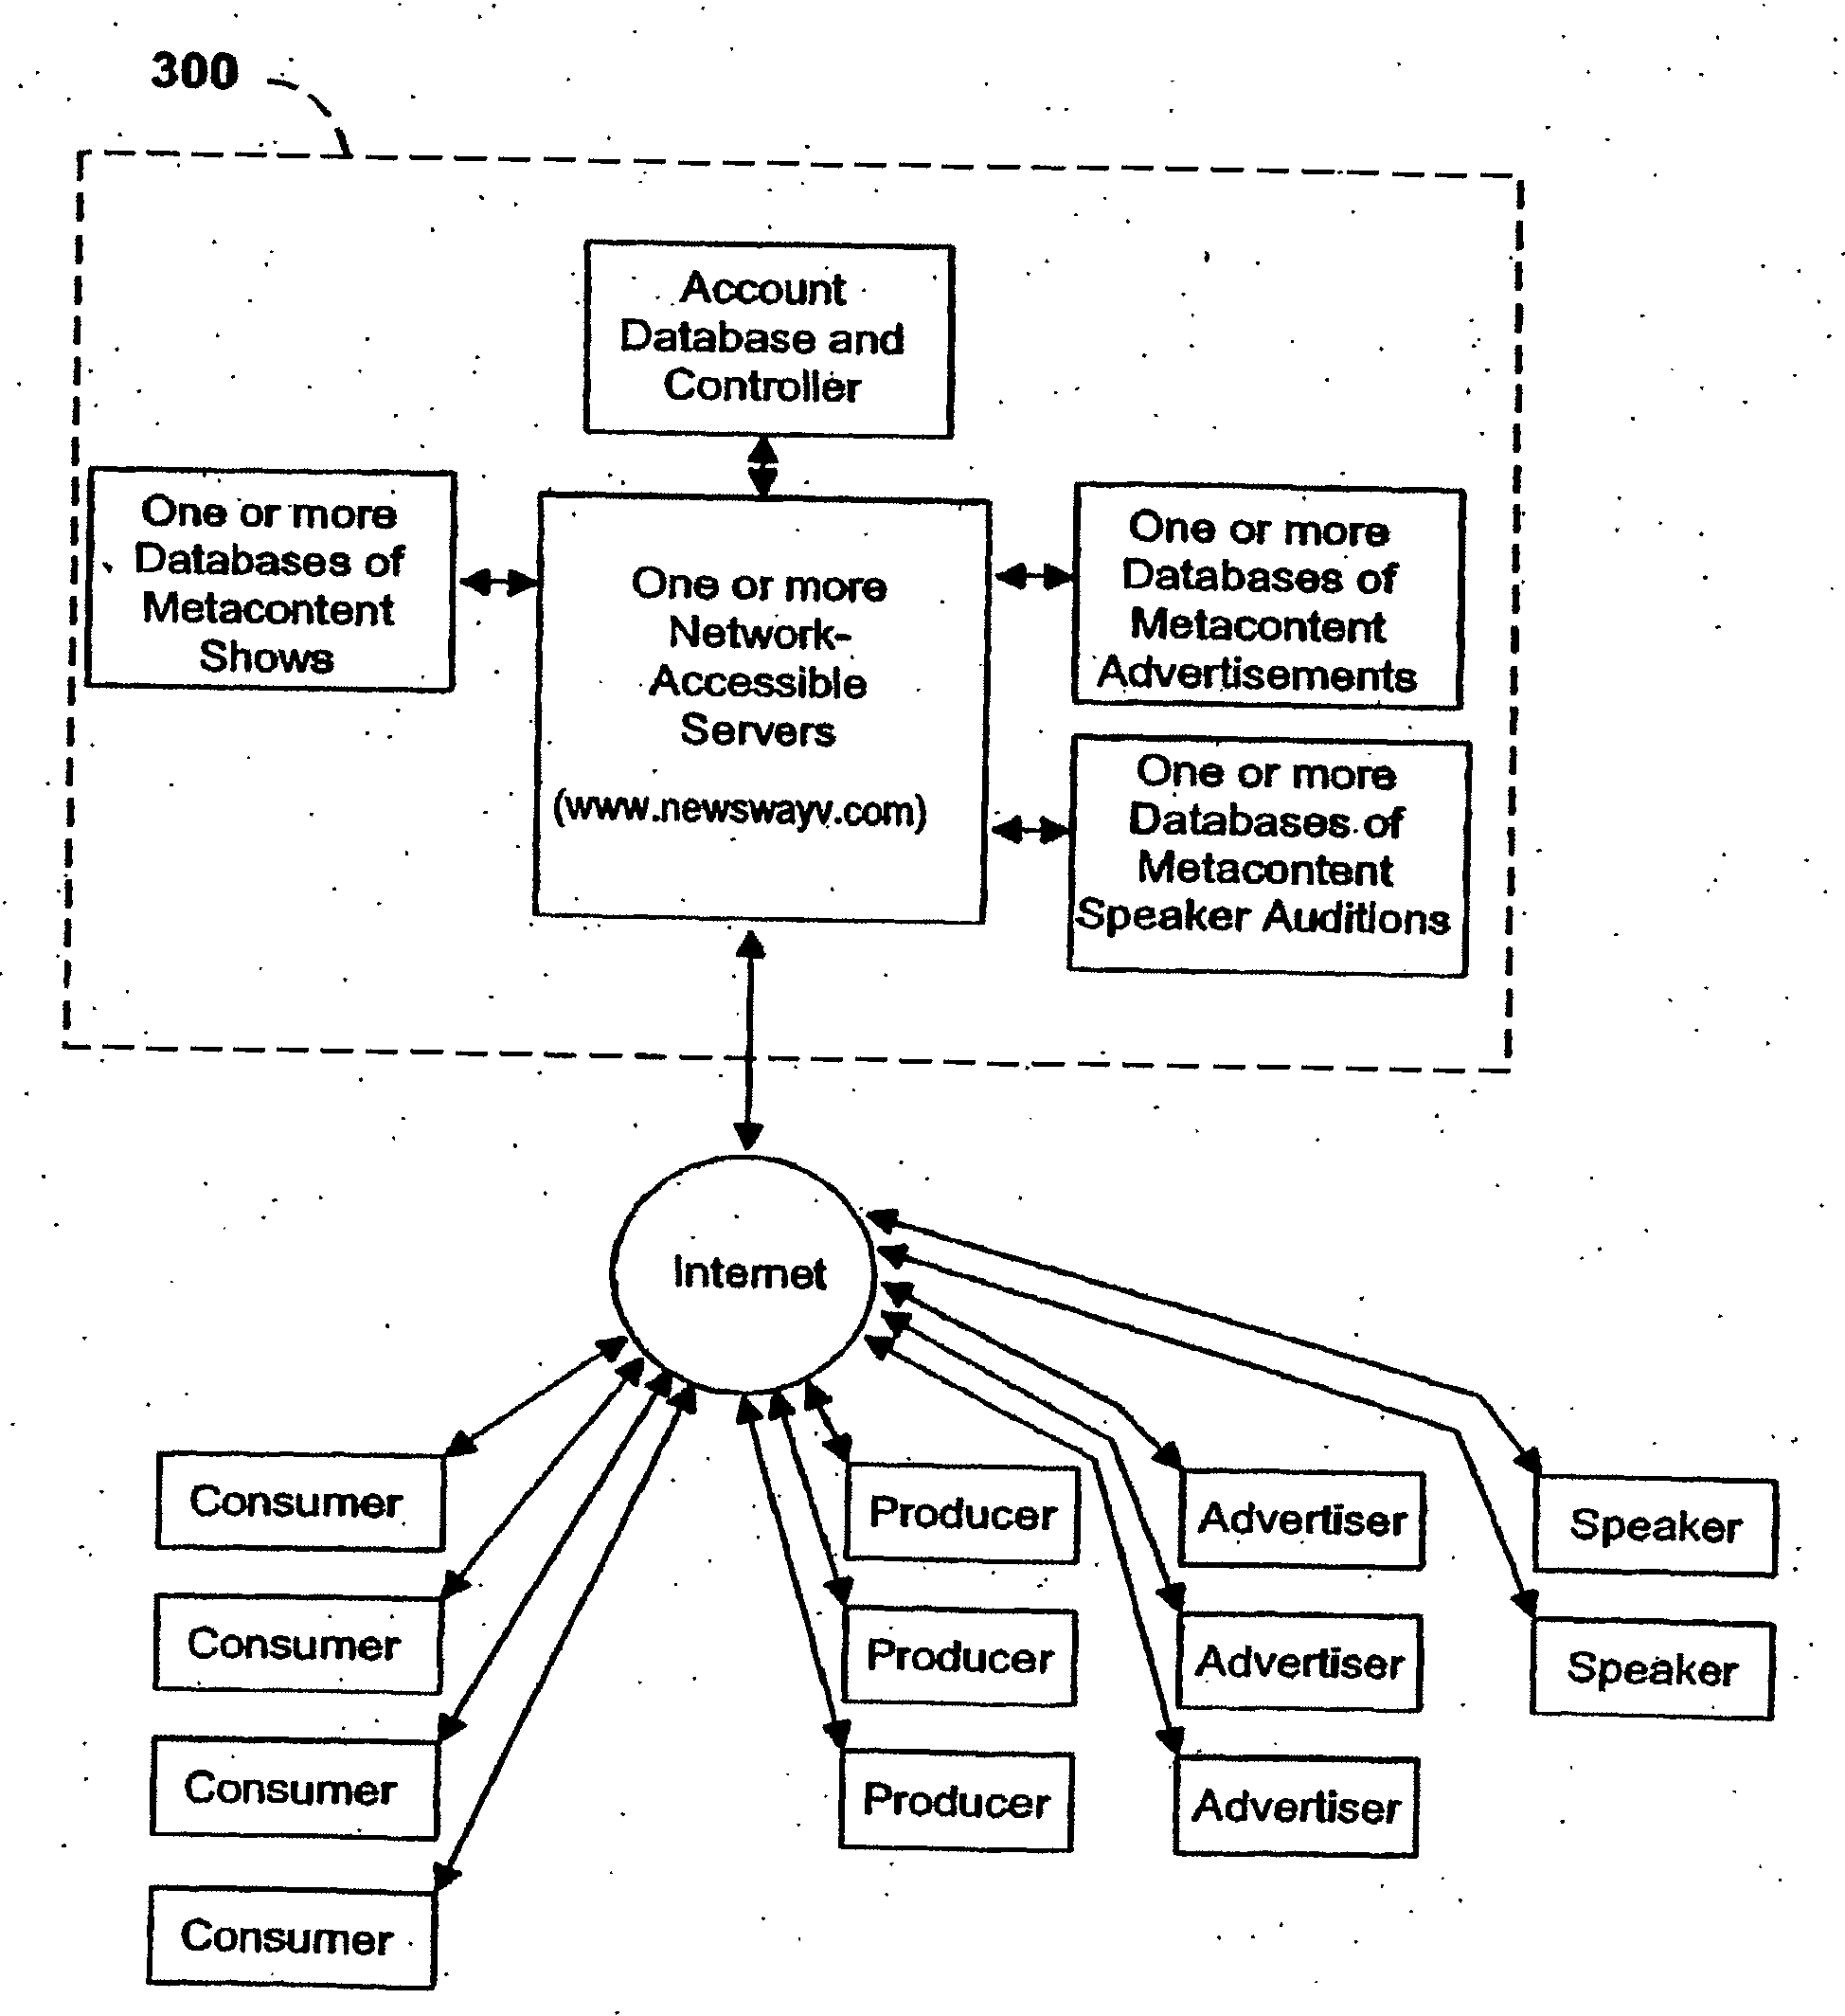 Systems, methods, and computer program products for the creation, monetization, distribution, and consumption of metacontent